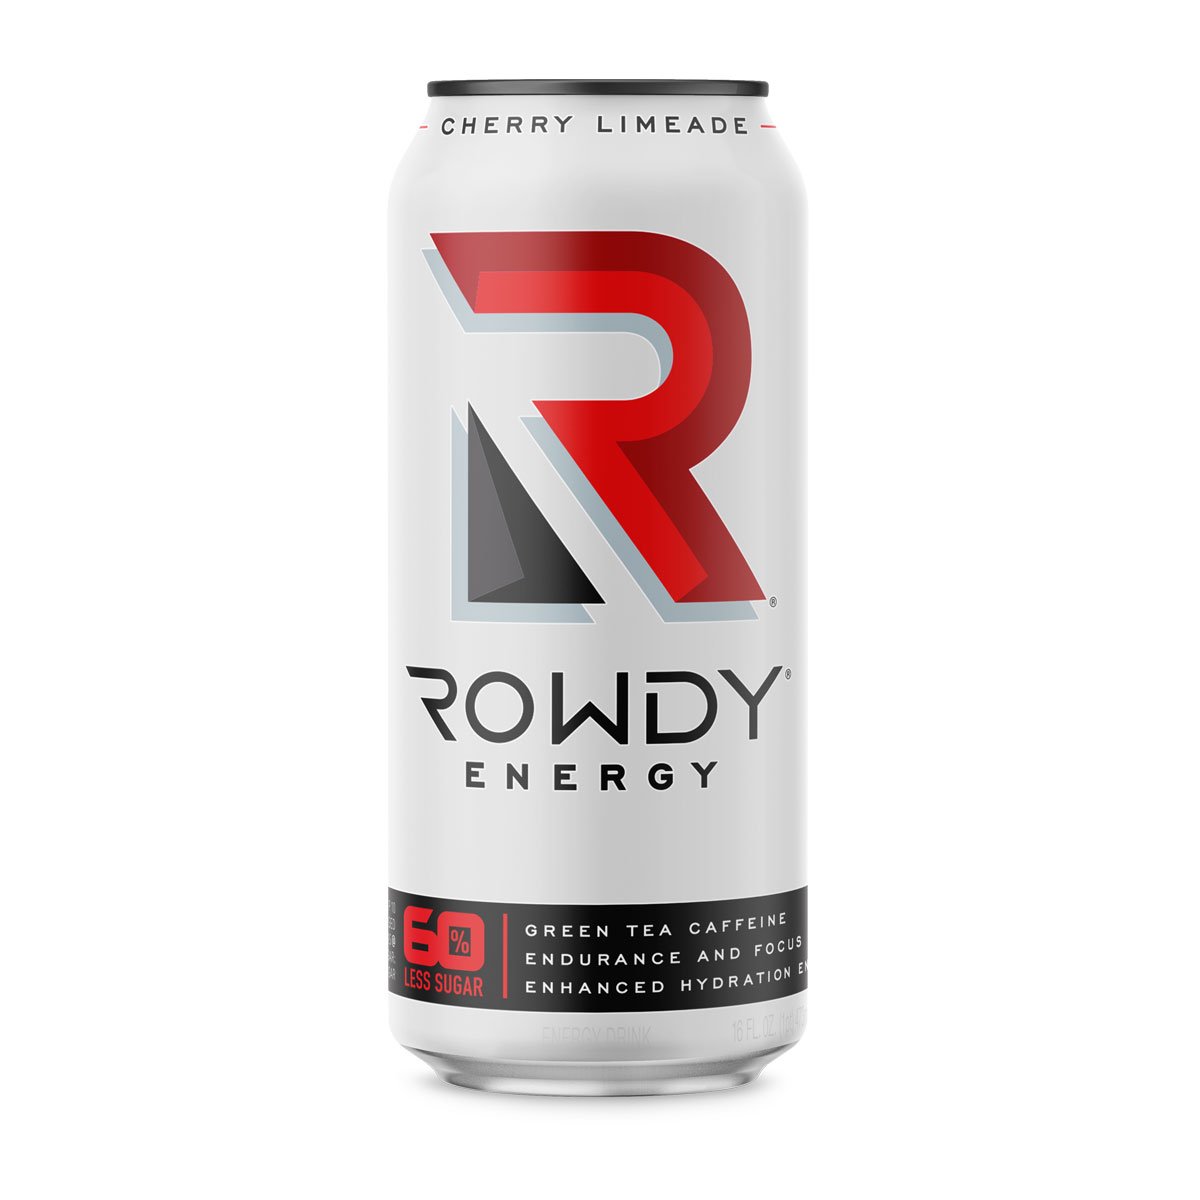 Free Deal of The Day FREE Rowdy Energy Drink 16oz at Food Lion